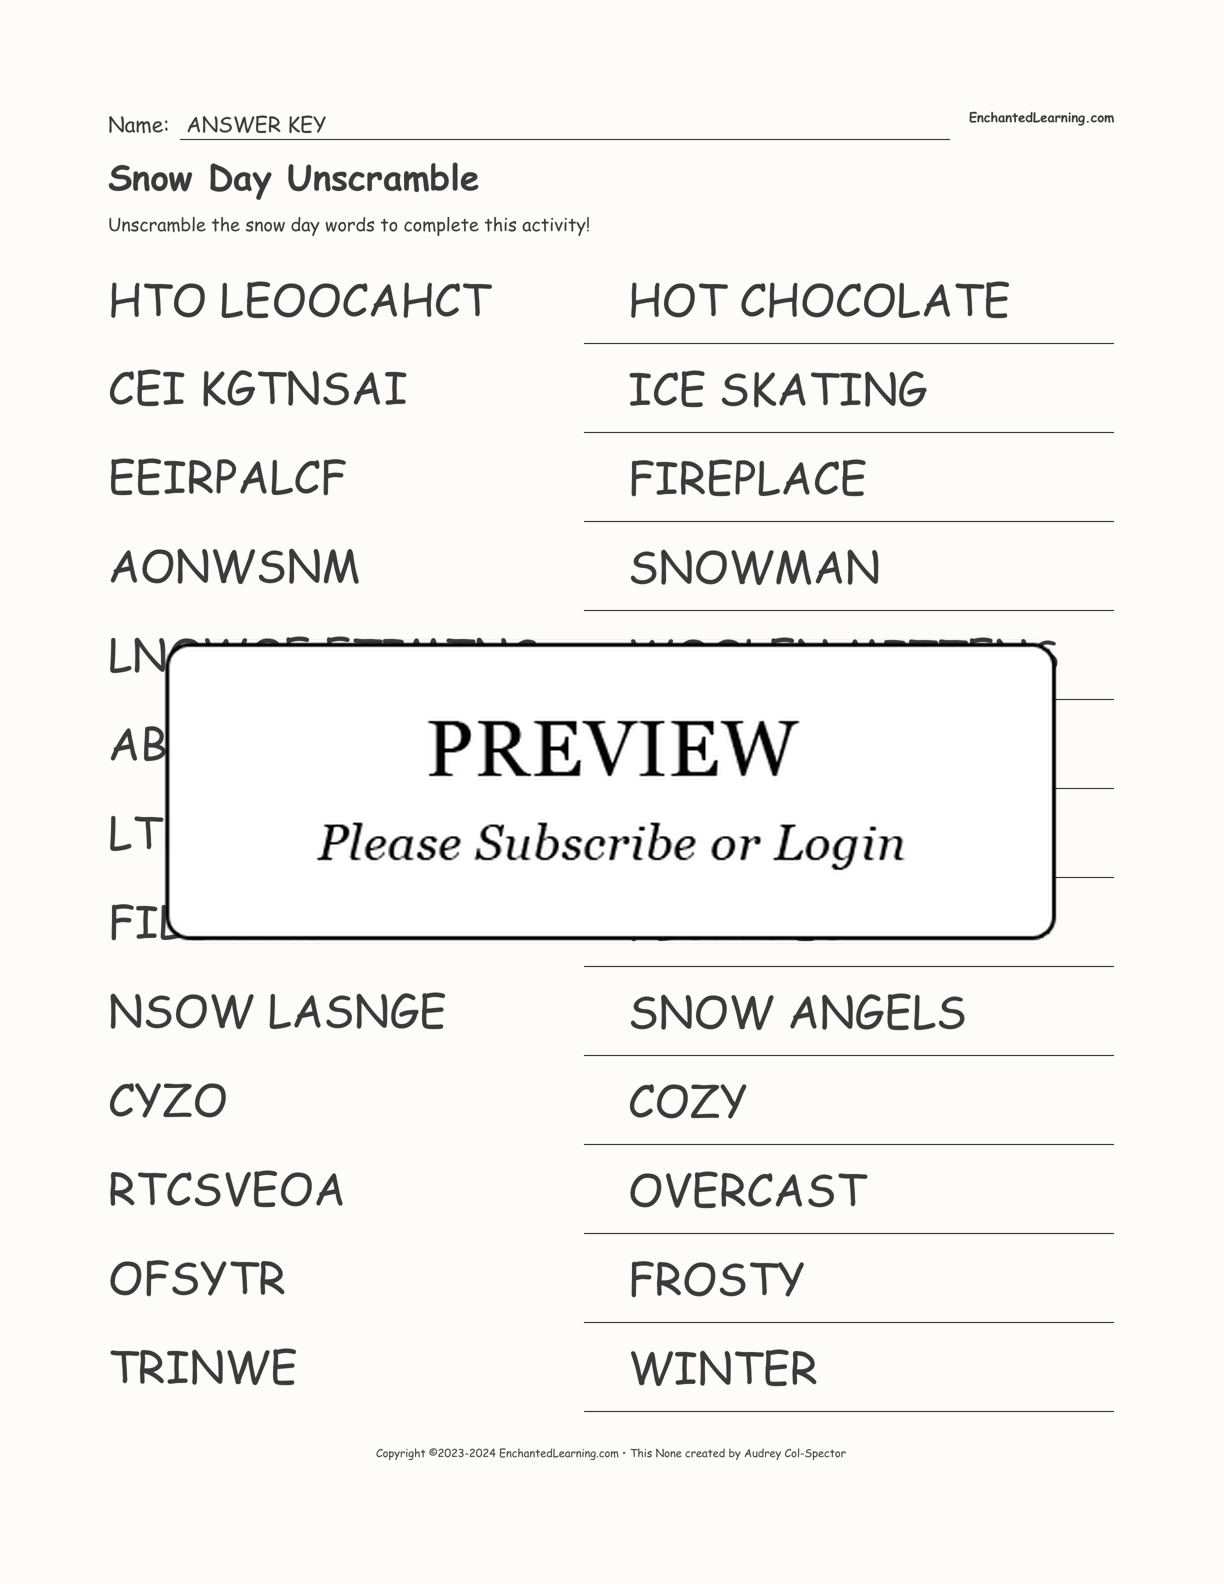 Snow Day Unscramble interactive worksheet page 2